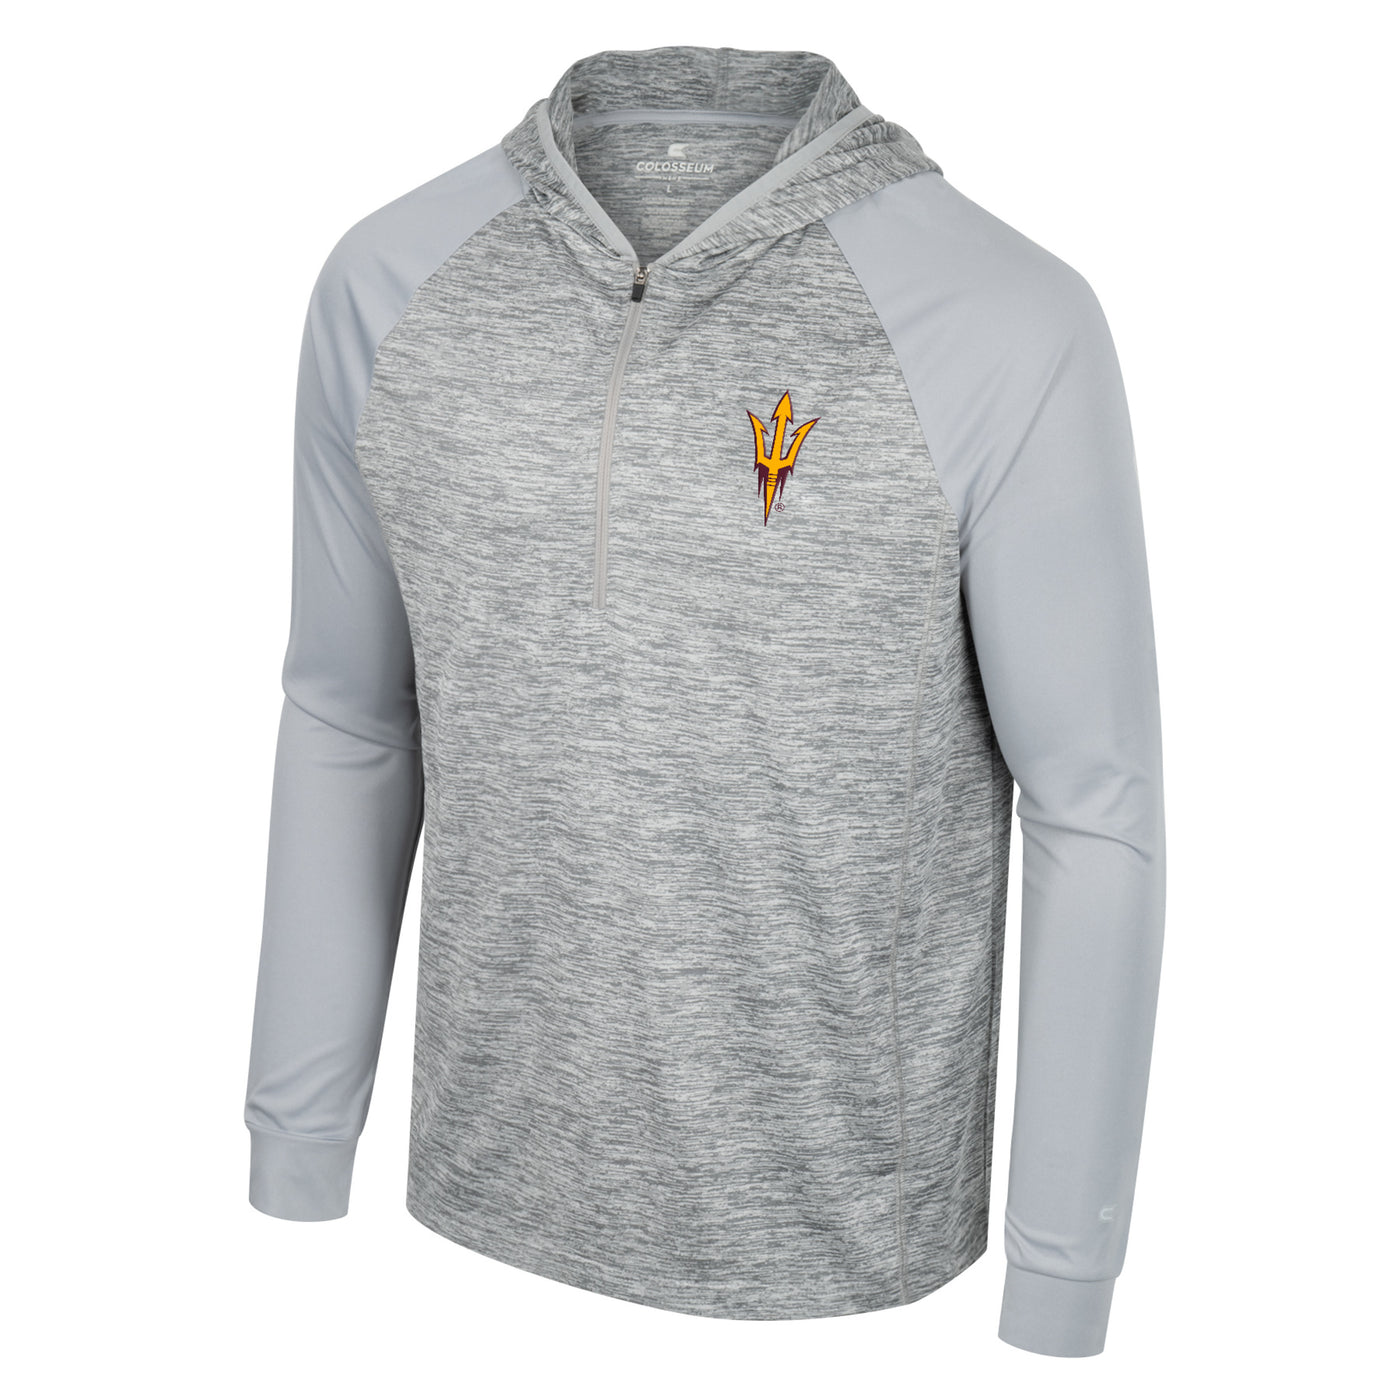 ASU grey hooded 1/4 zip. the majority of the long sleeve is a grey and white static color while the arms are a solid grey. there is a small pitchfork in gold outlined in black on the chest